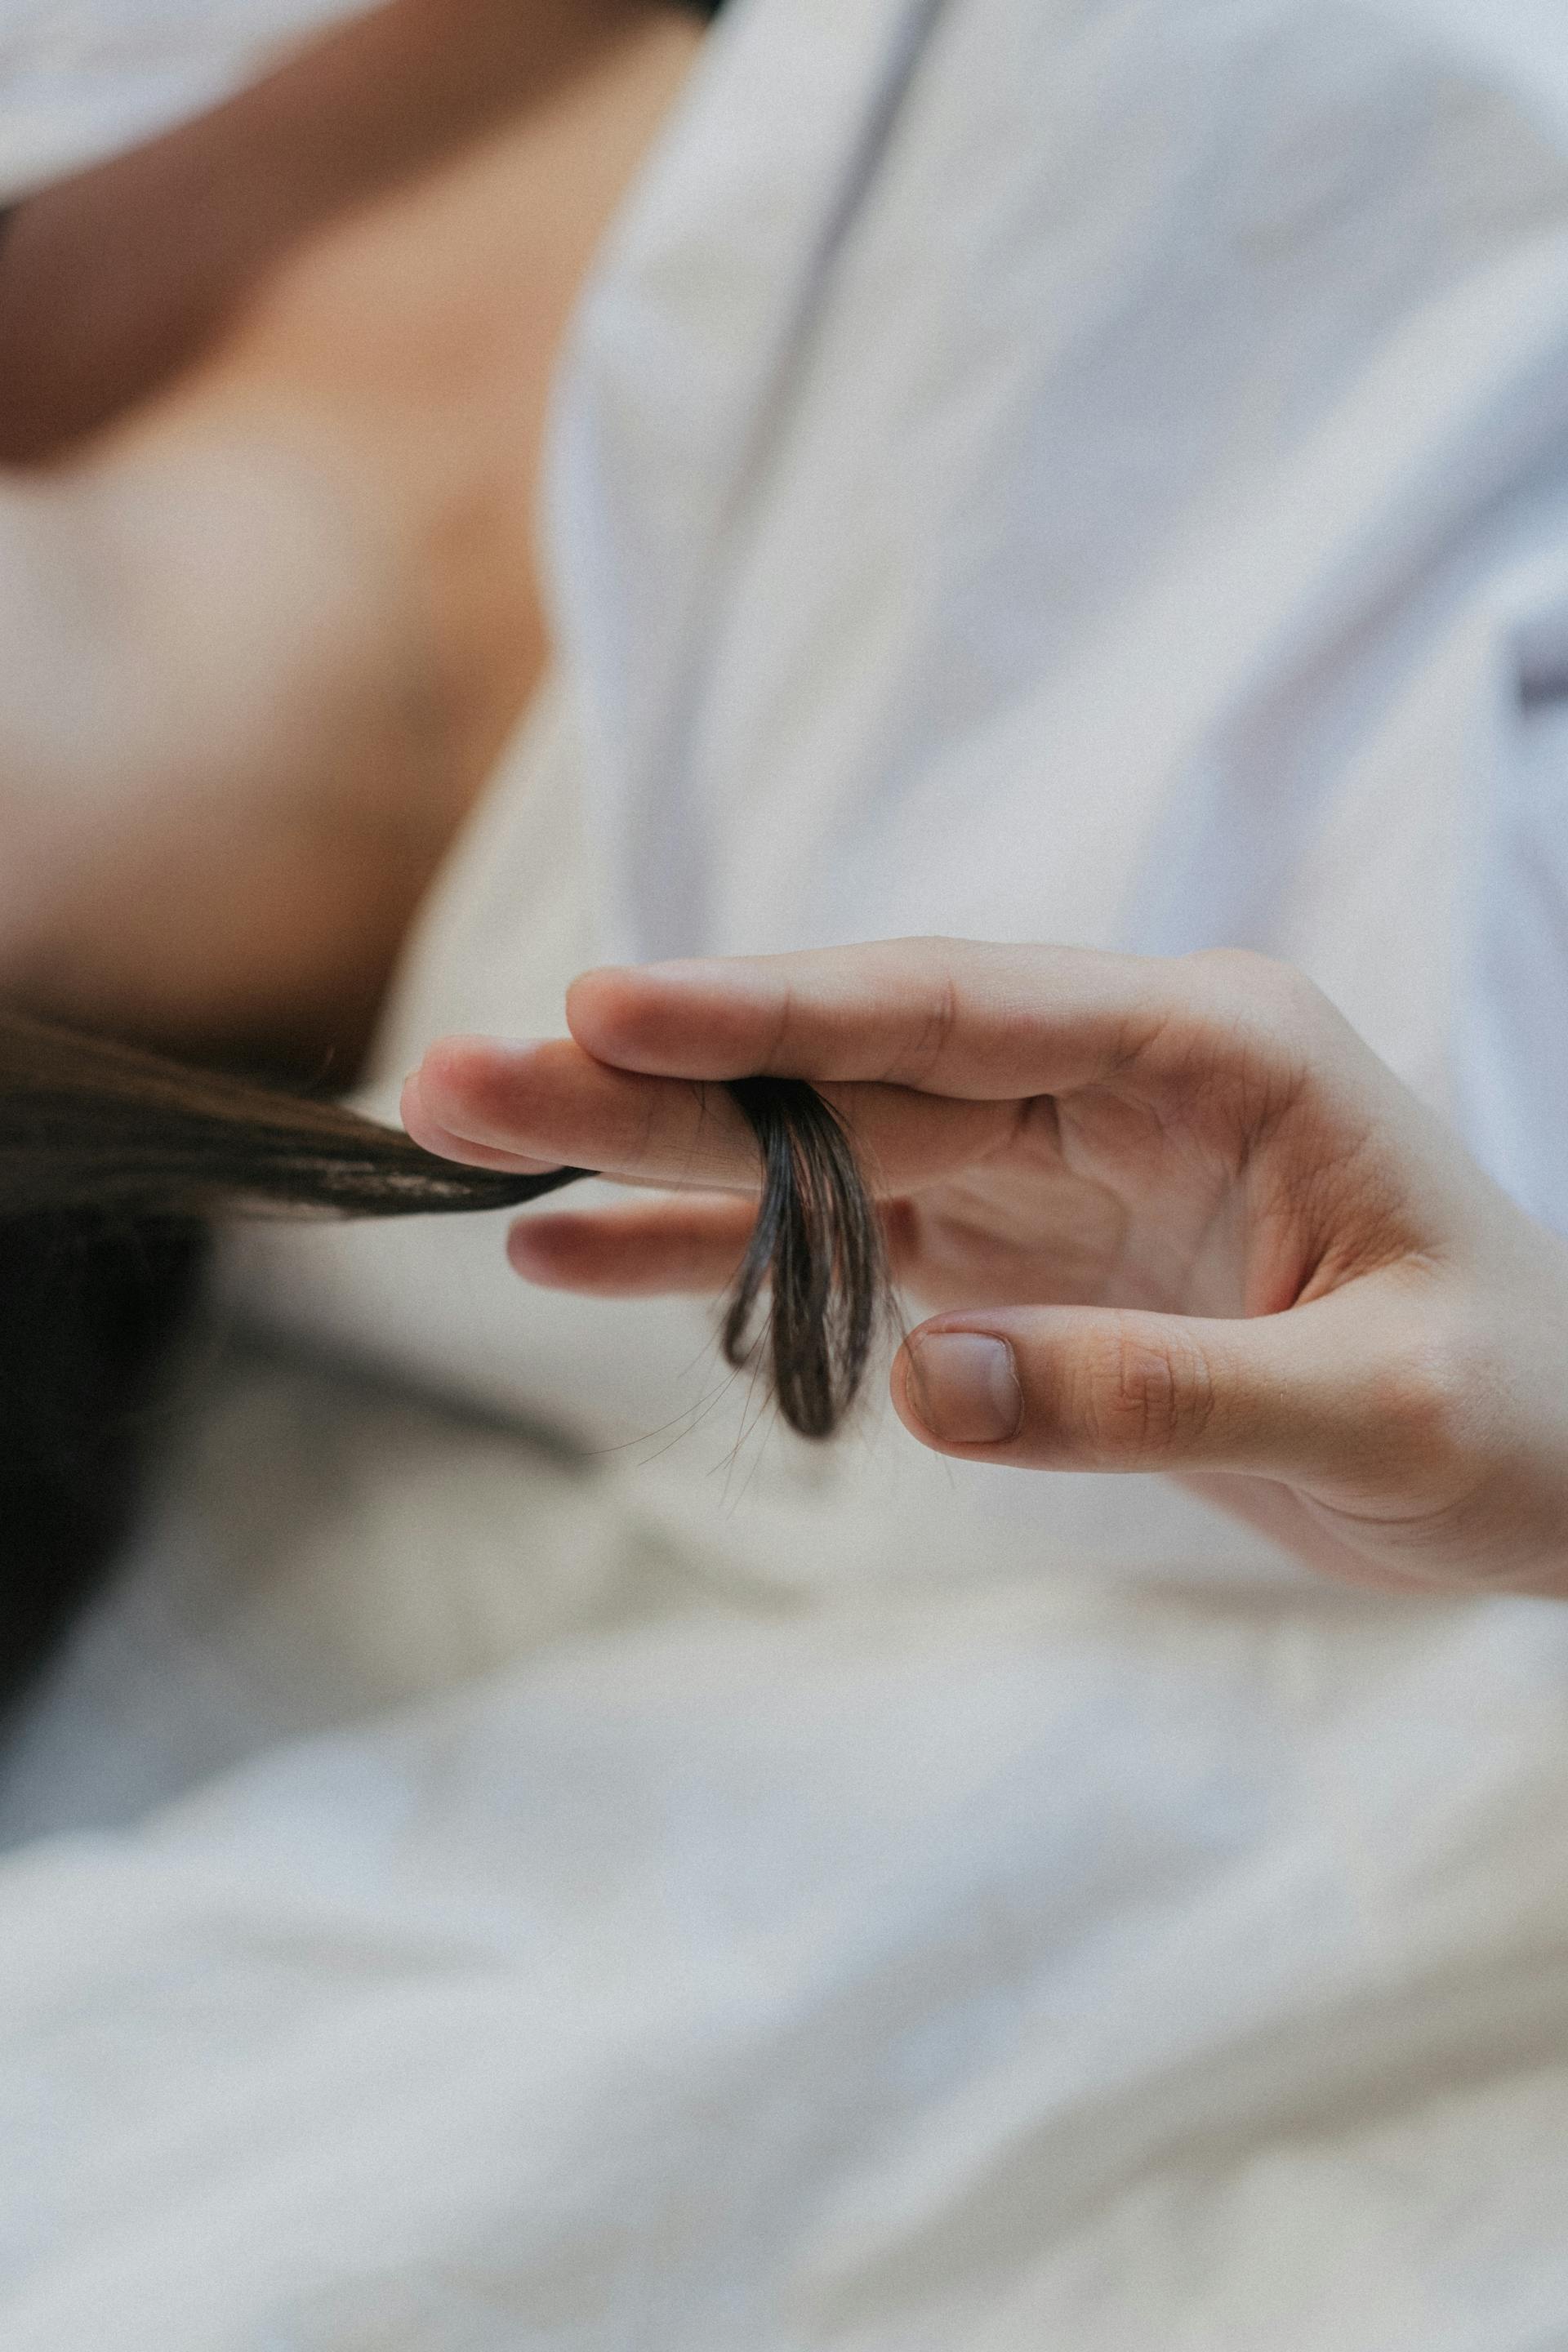 A person twirling a lock of hair | Source: Pexels